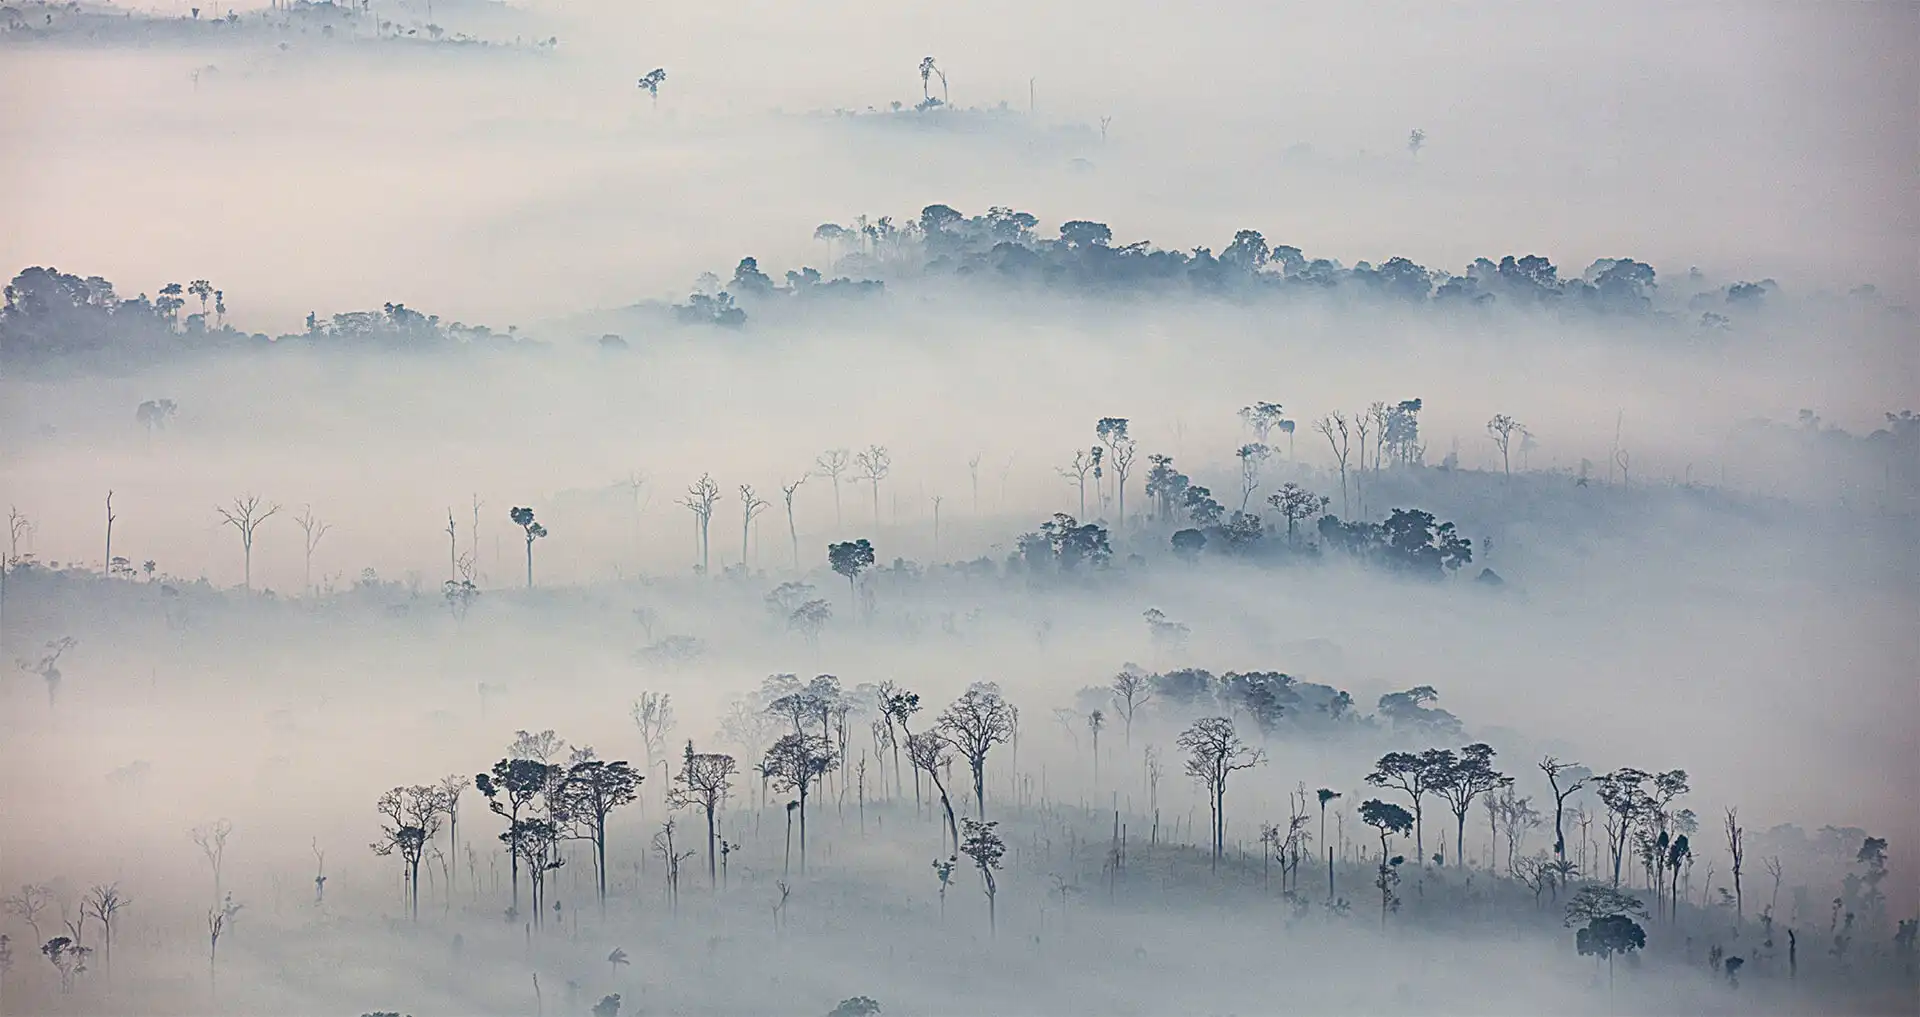 SMOKE IN THE TAPAJÓS NATIONAL FOREST, AMAZON REGION OF PARÁ STATE, SEPTEMBER 2020